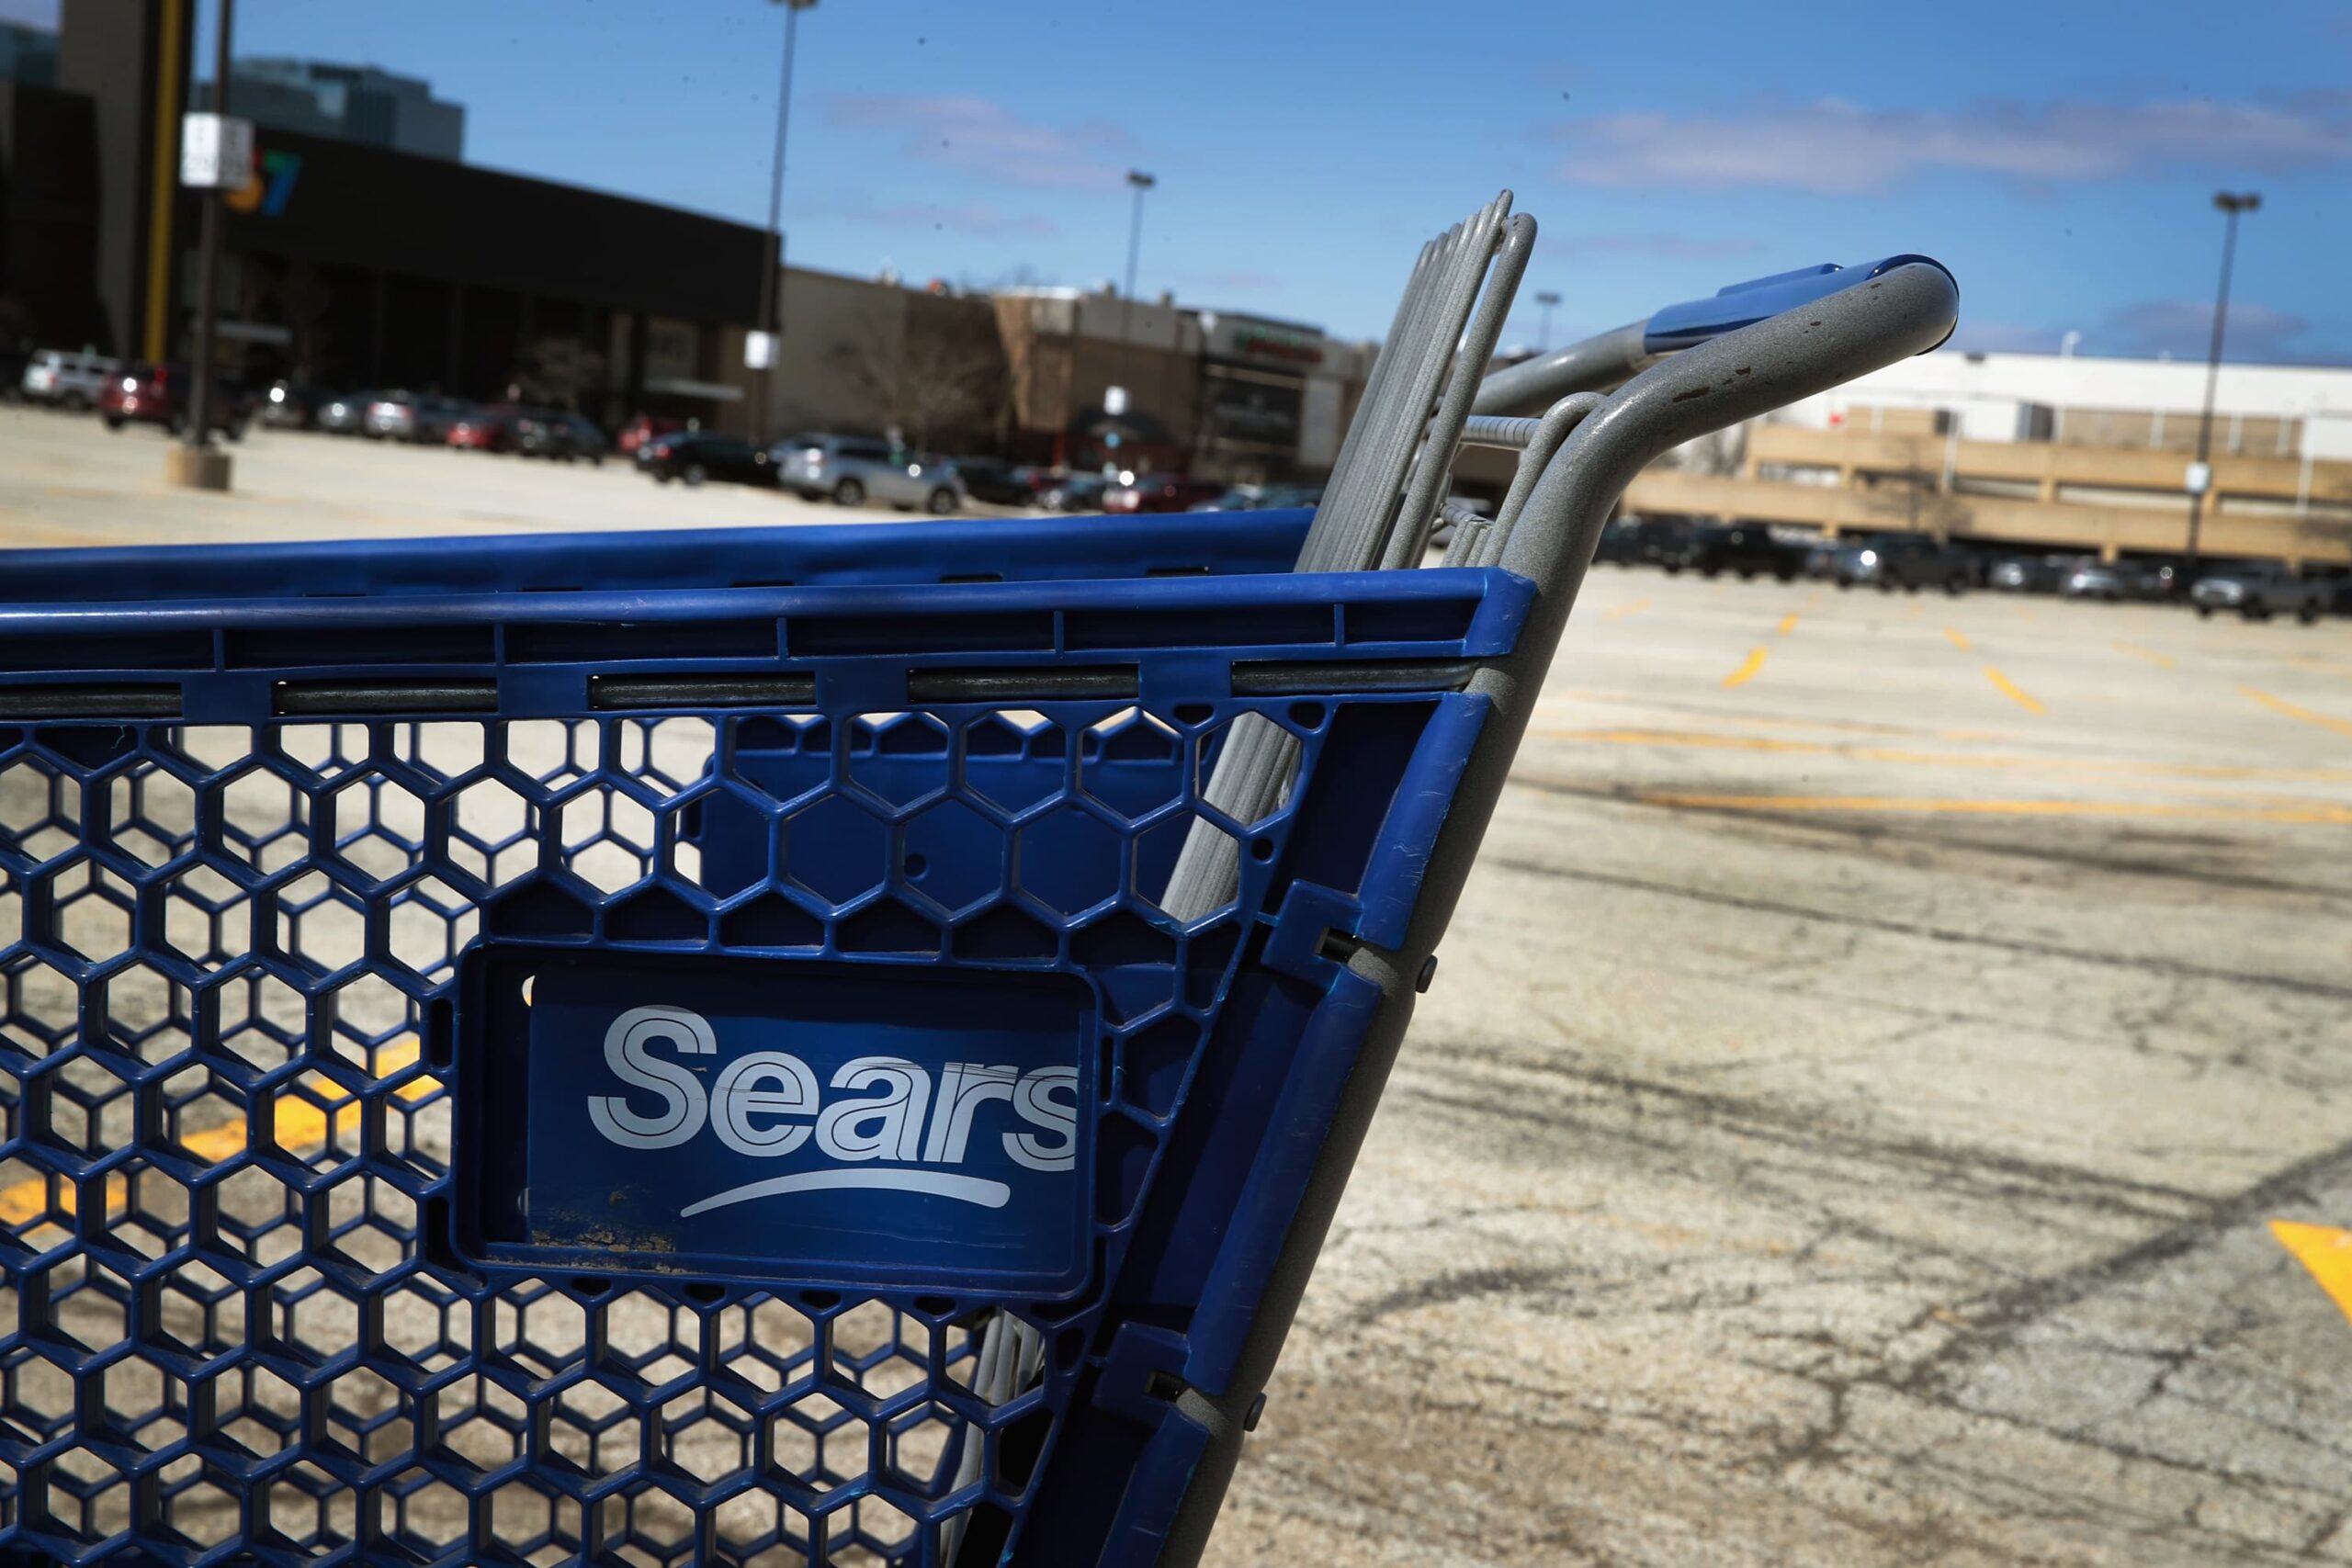 Sears is shutting its last store in Illinois, its home state